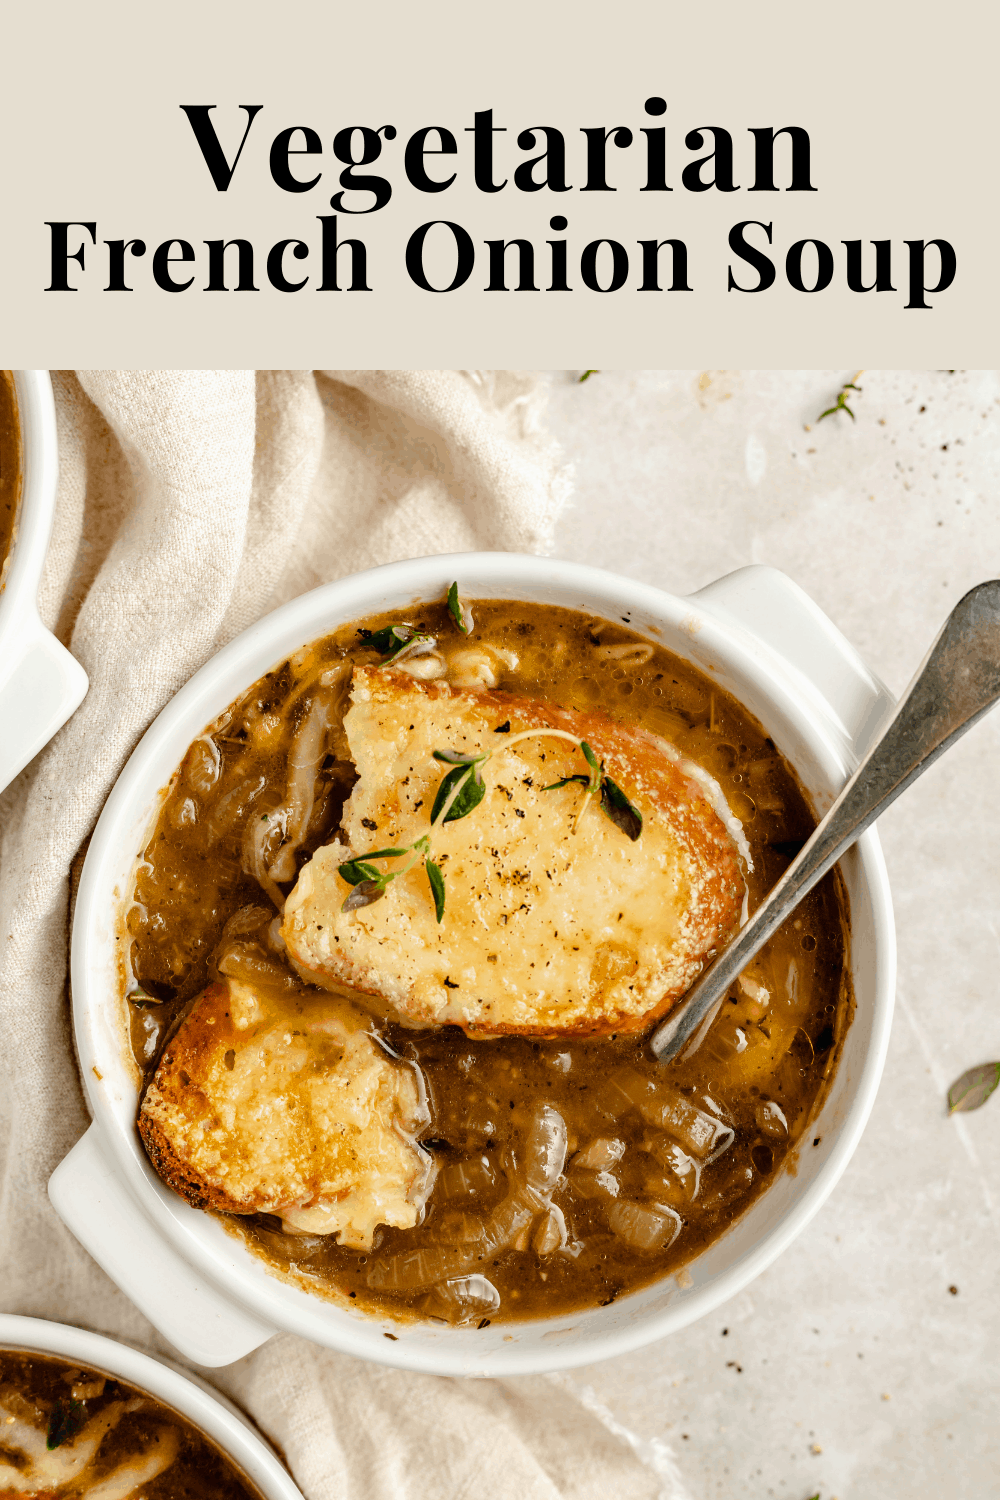 Vegetarian French Onion Soup - The Toasted Pine Nut